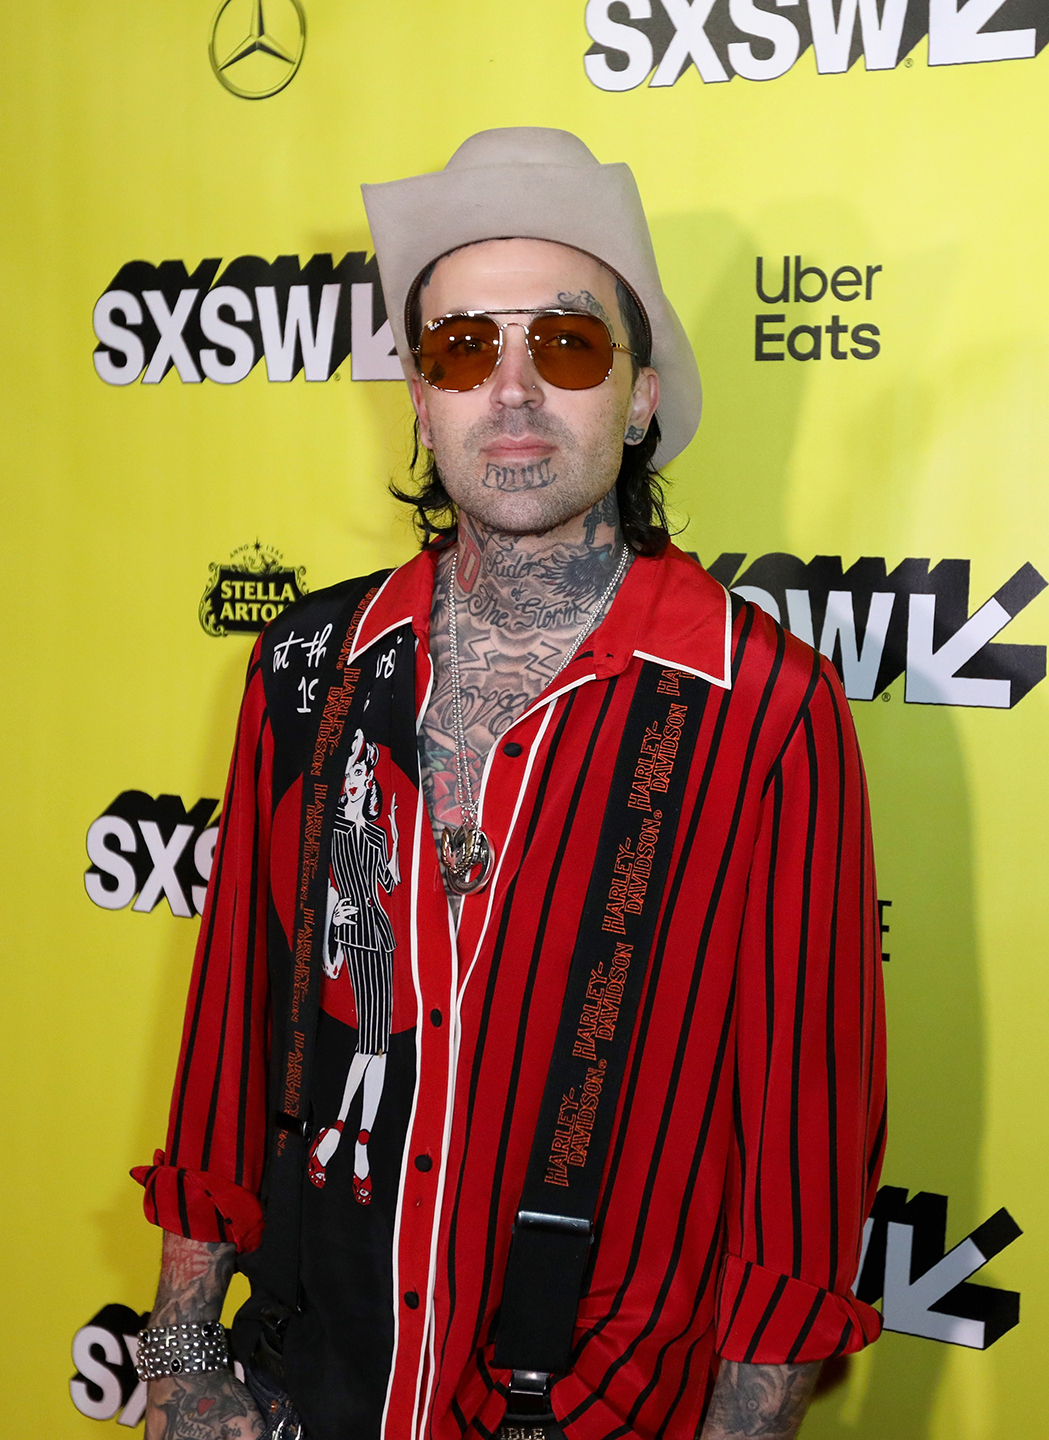 Yelawolf attends The Peanut Butter Falcon world premiere at the Atom Theater.